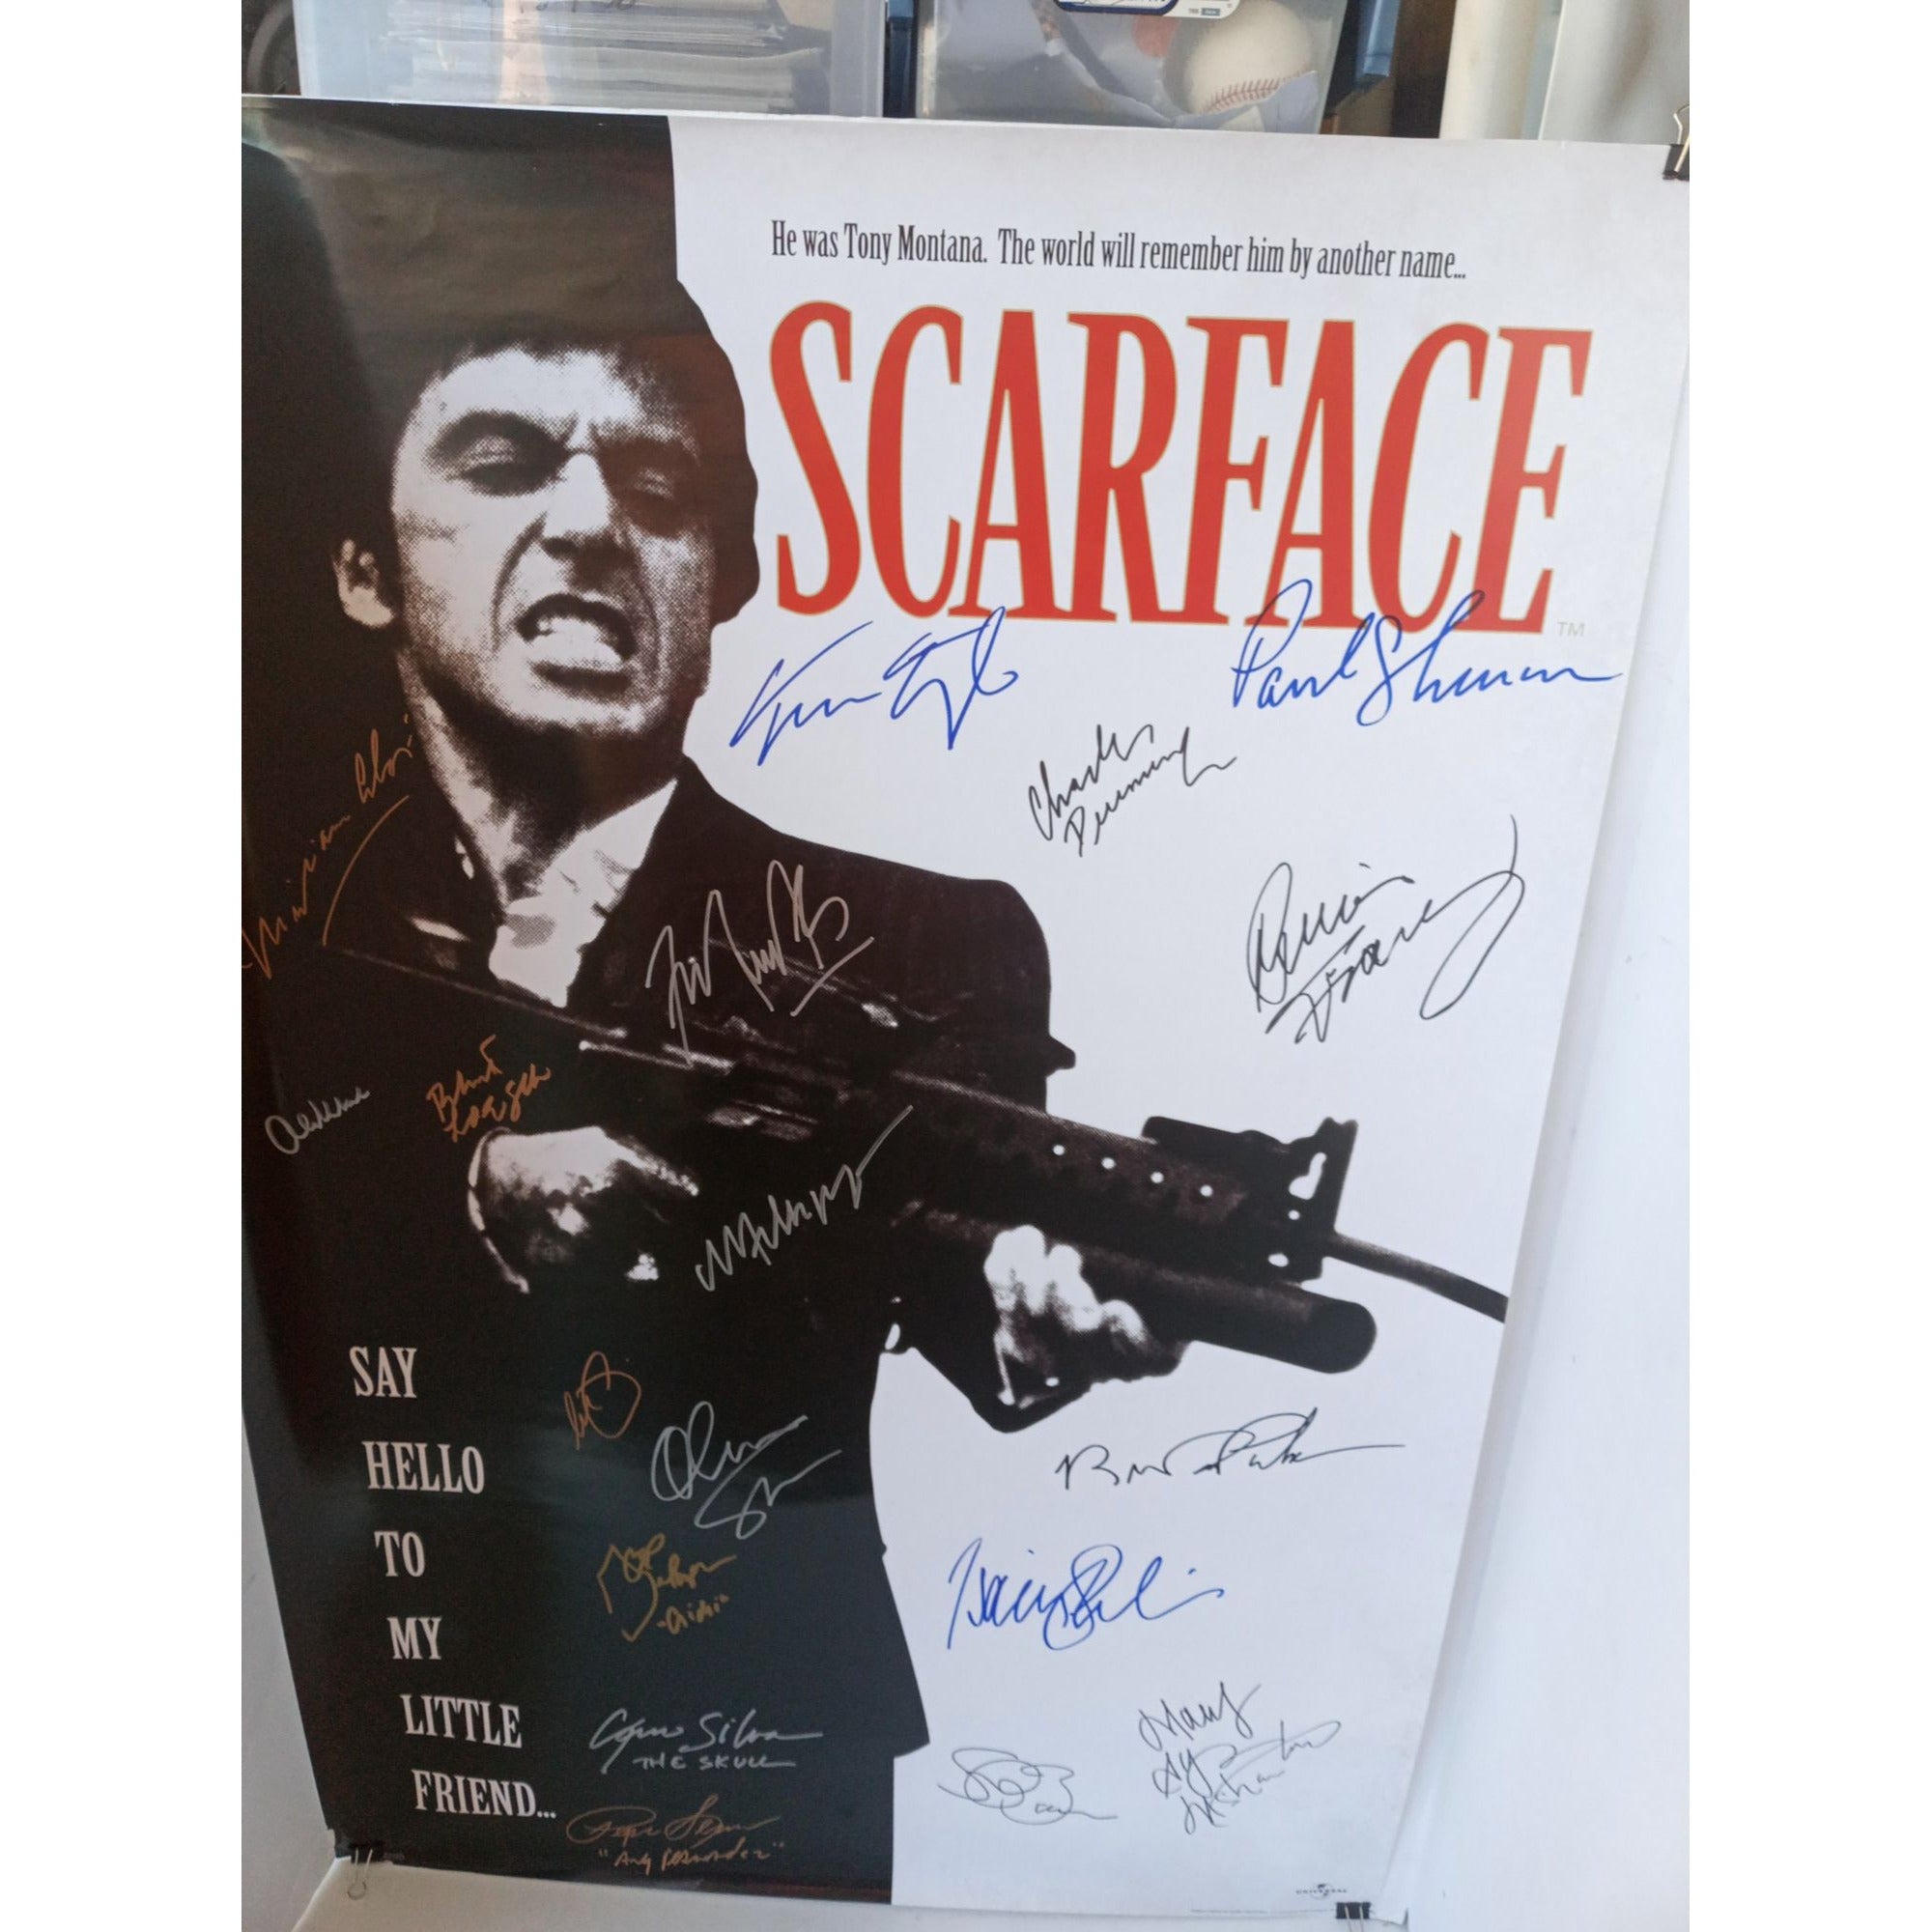 Scarface Al Pacino, Oliver Stone, Michelle Pfeiffer, cast signed original movie poster 24x36 with proof